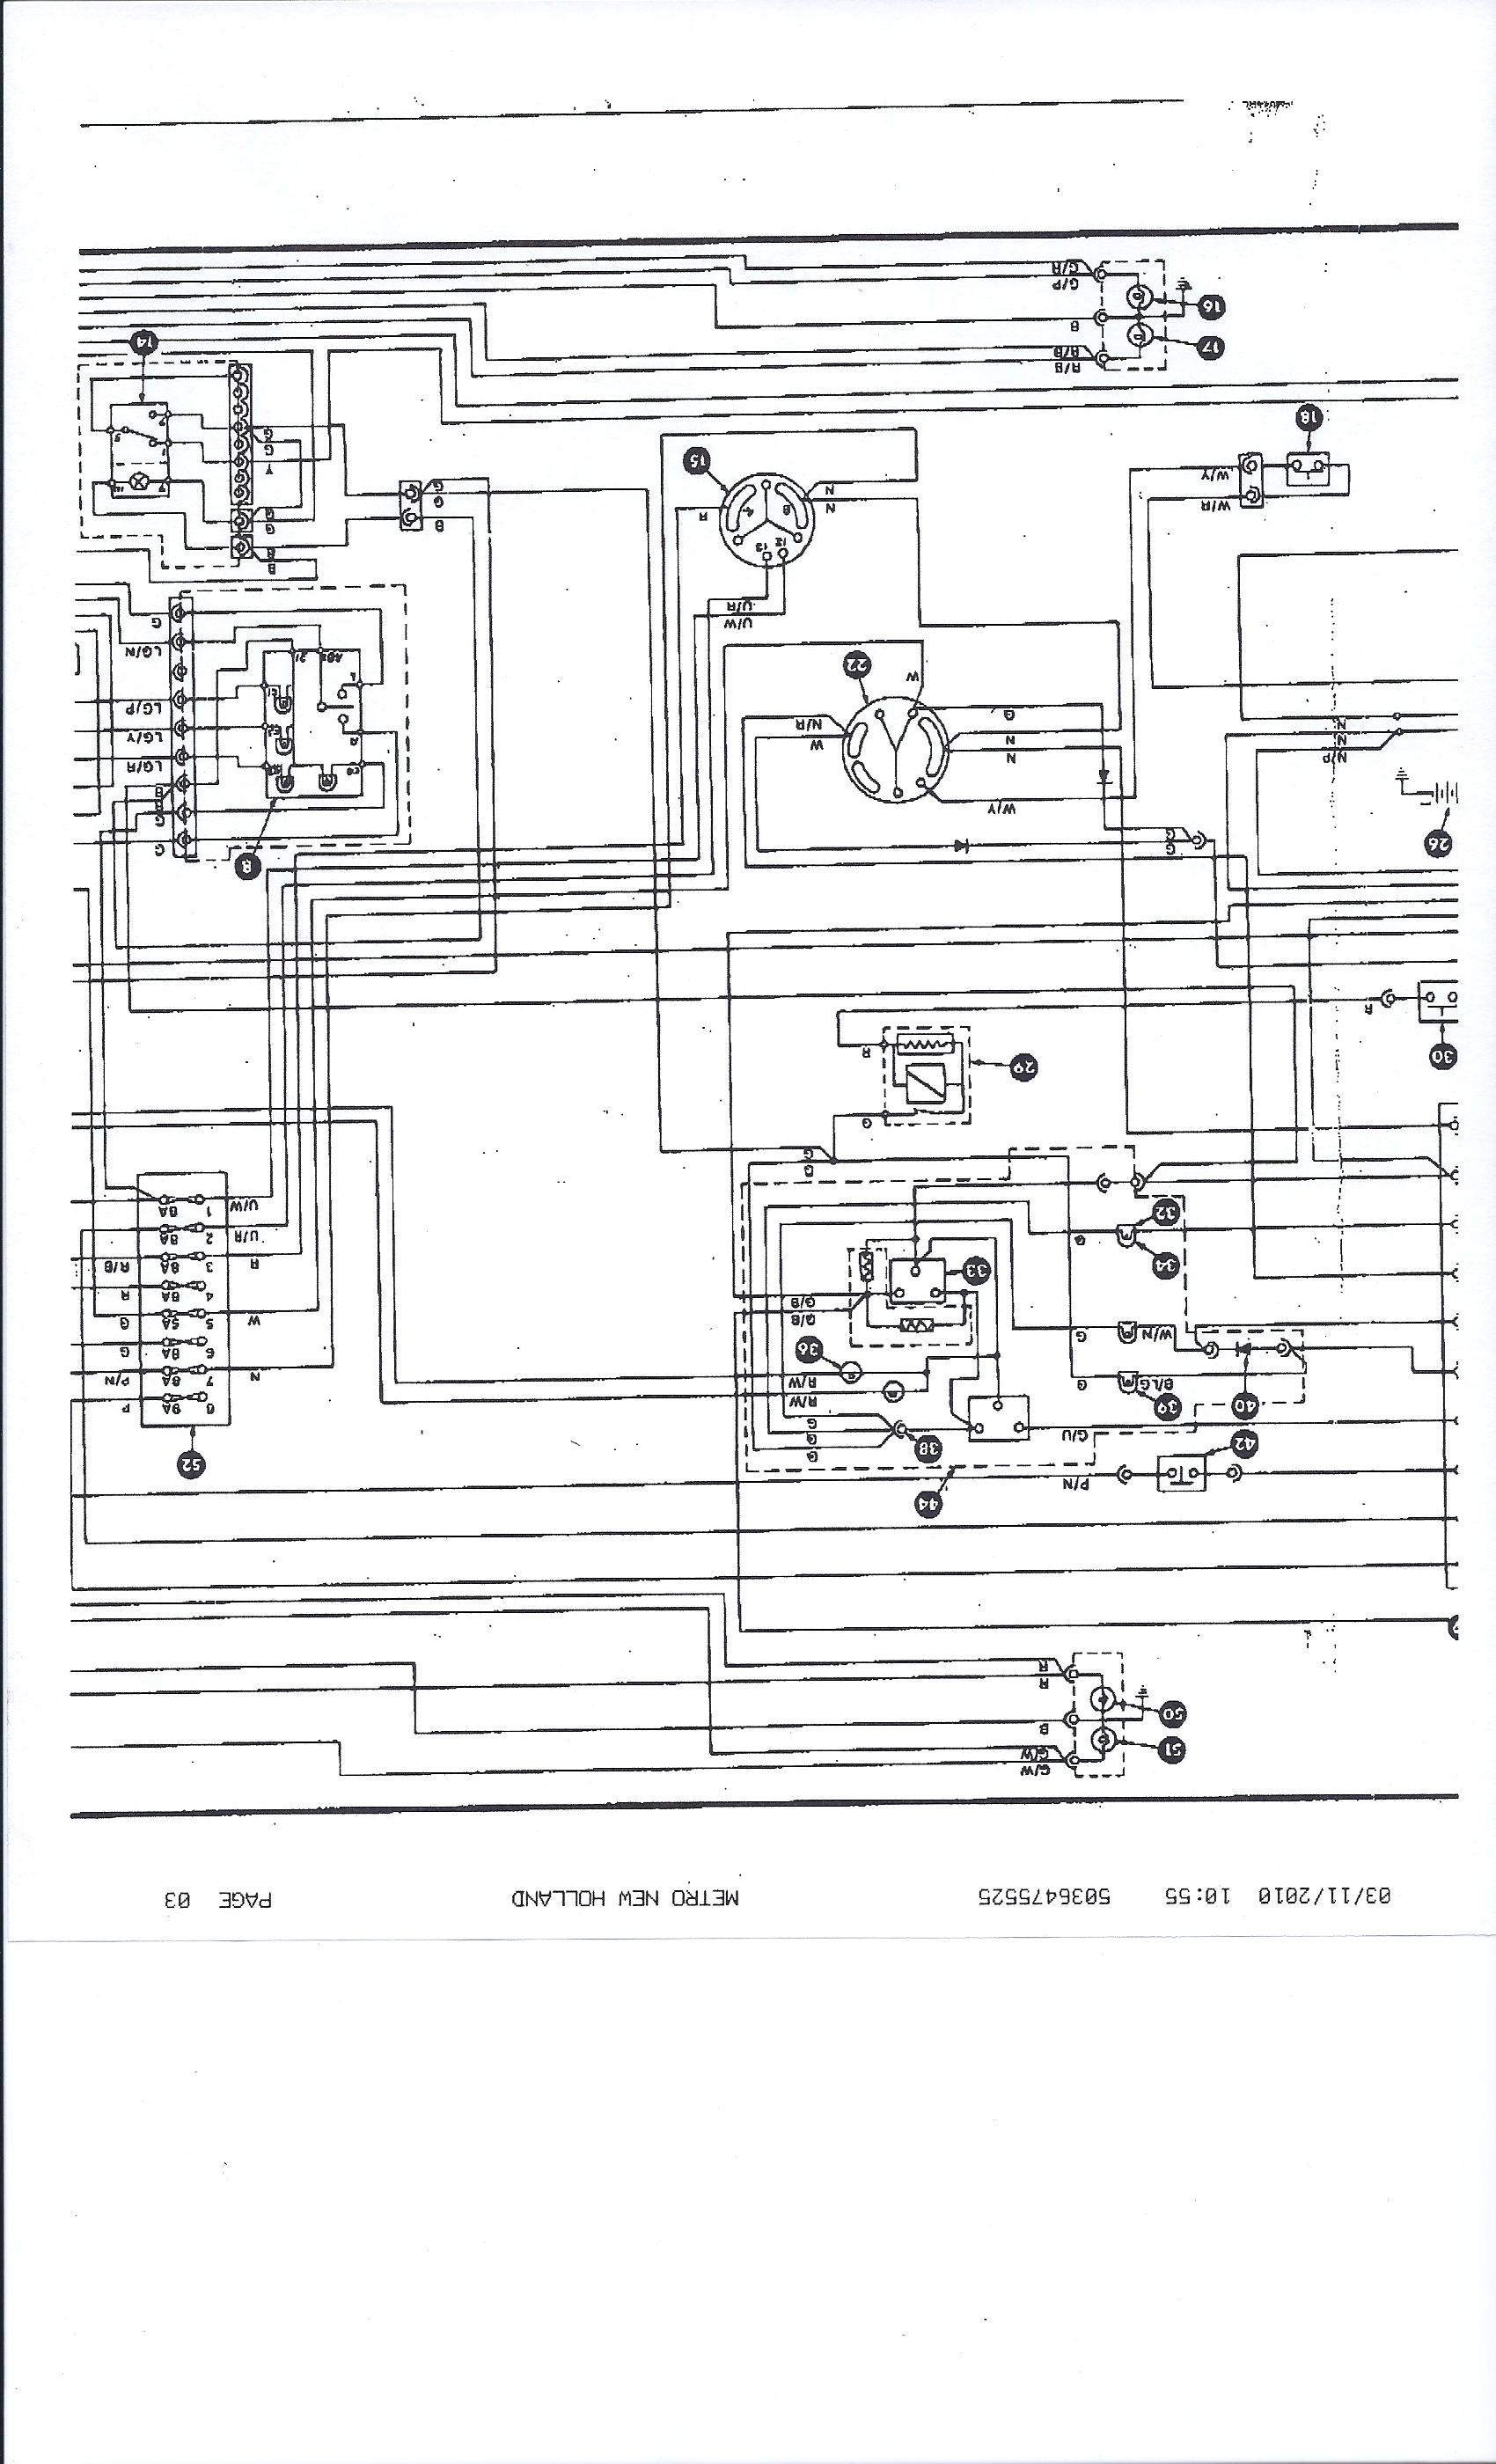 New Holland Skid Steer Parts Diagram New Holland Tc30 Wiring Diagram Today Diagram Database